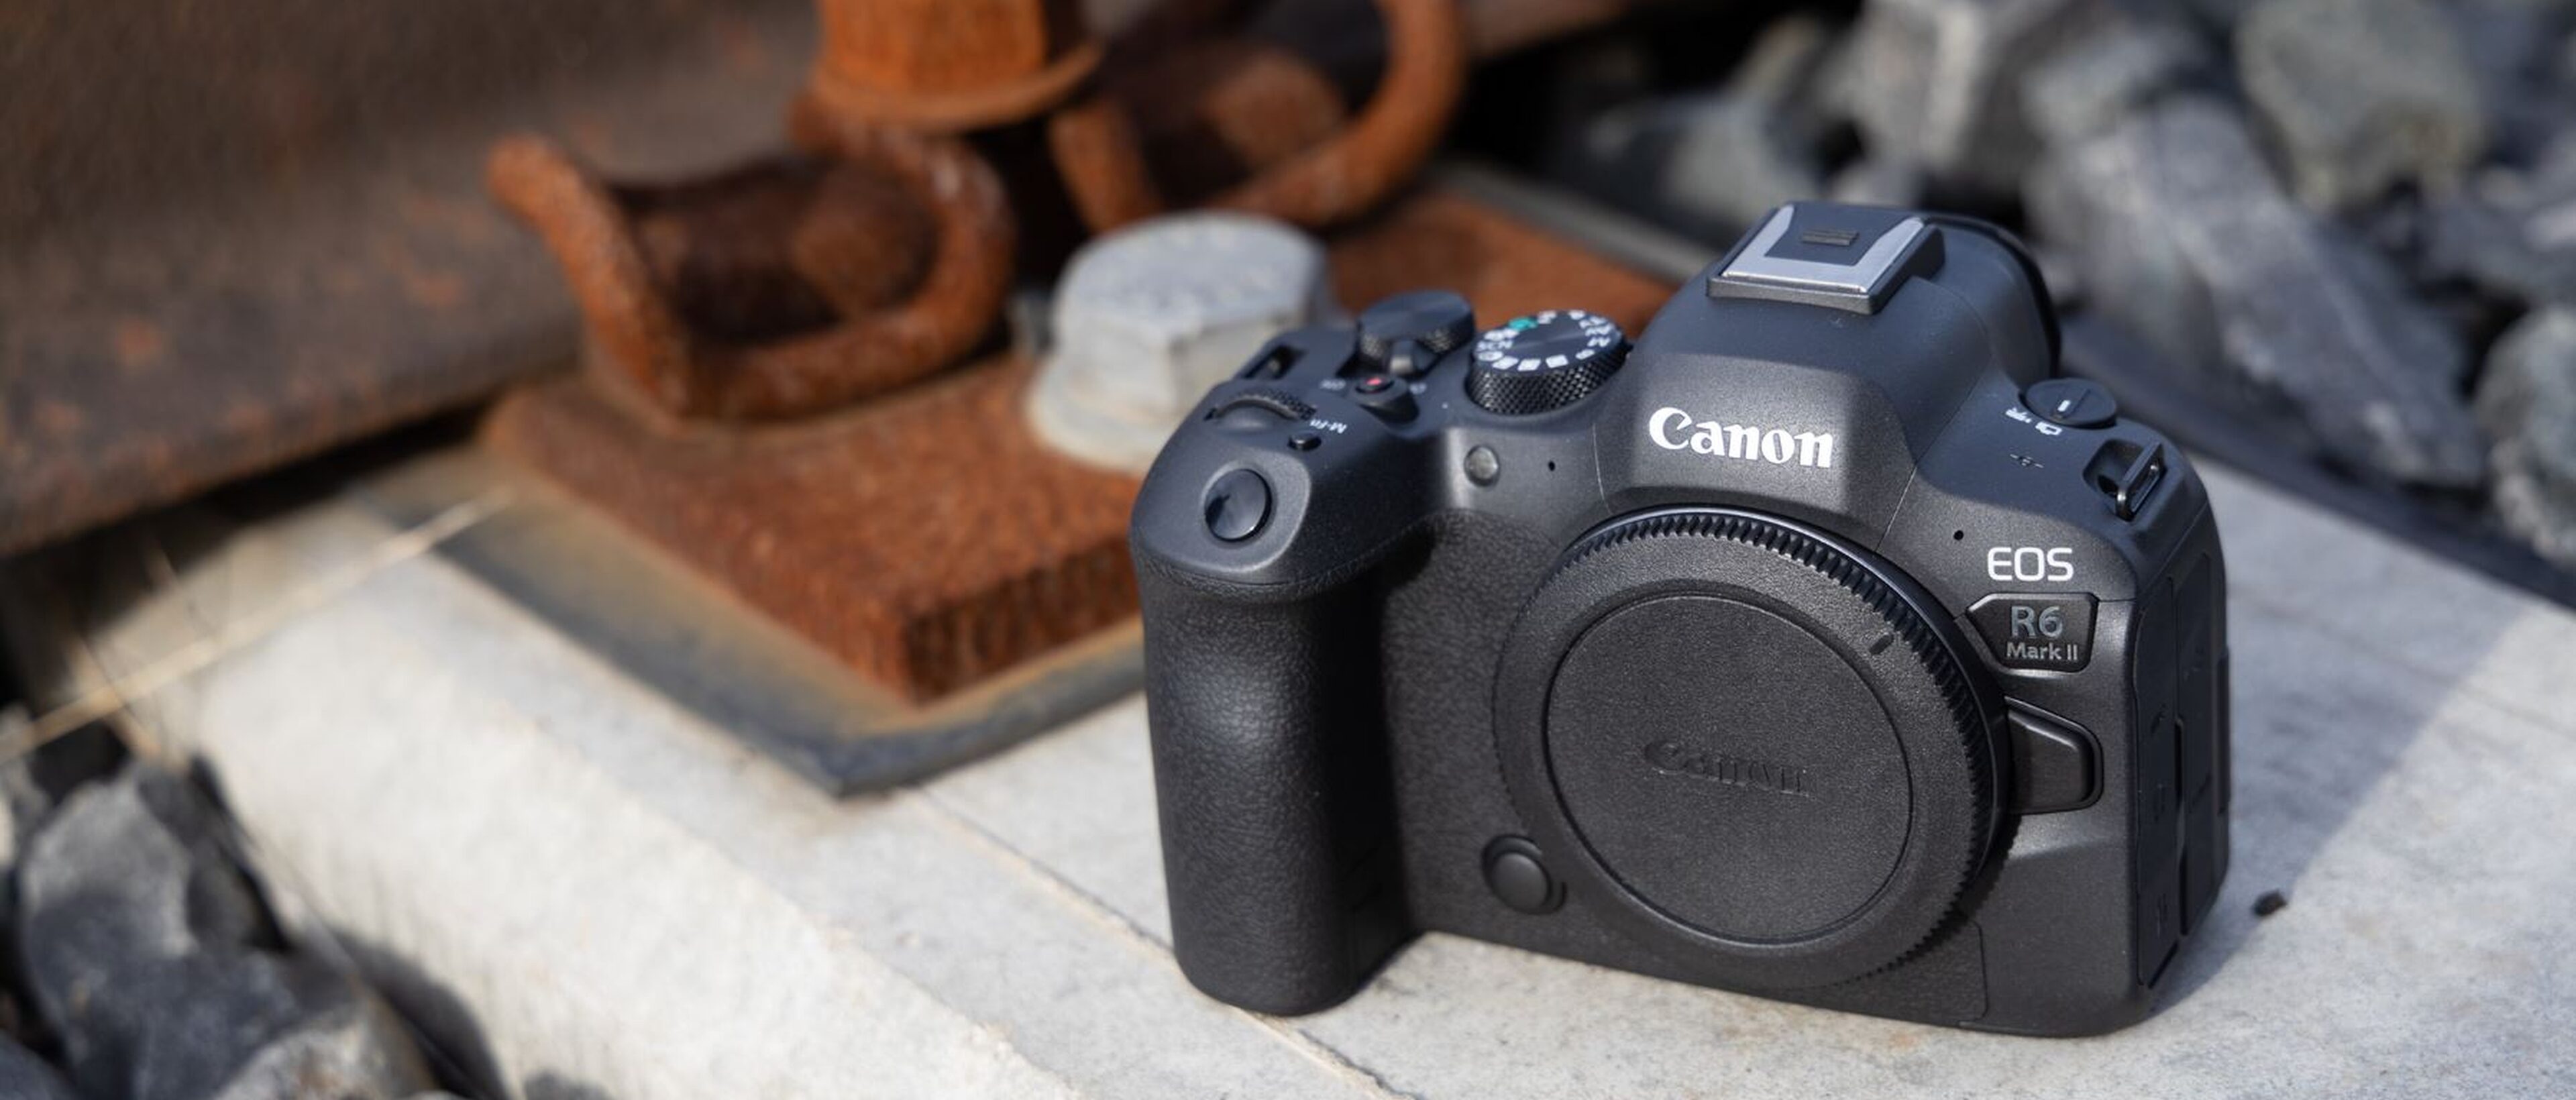 Preview Image: Die Zweite: Canon EOS R6 Mark II